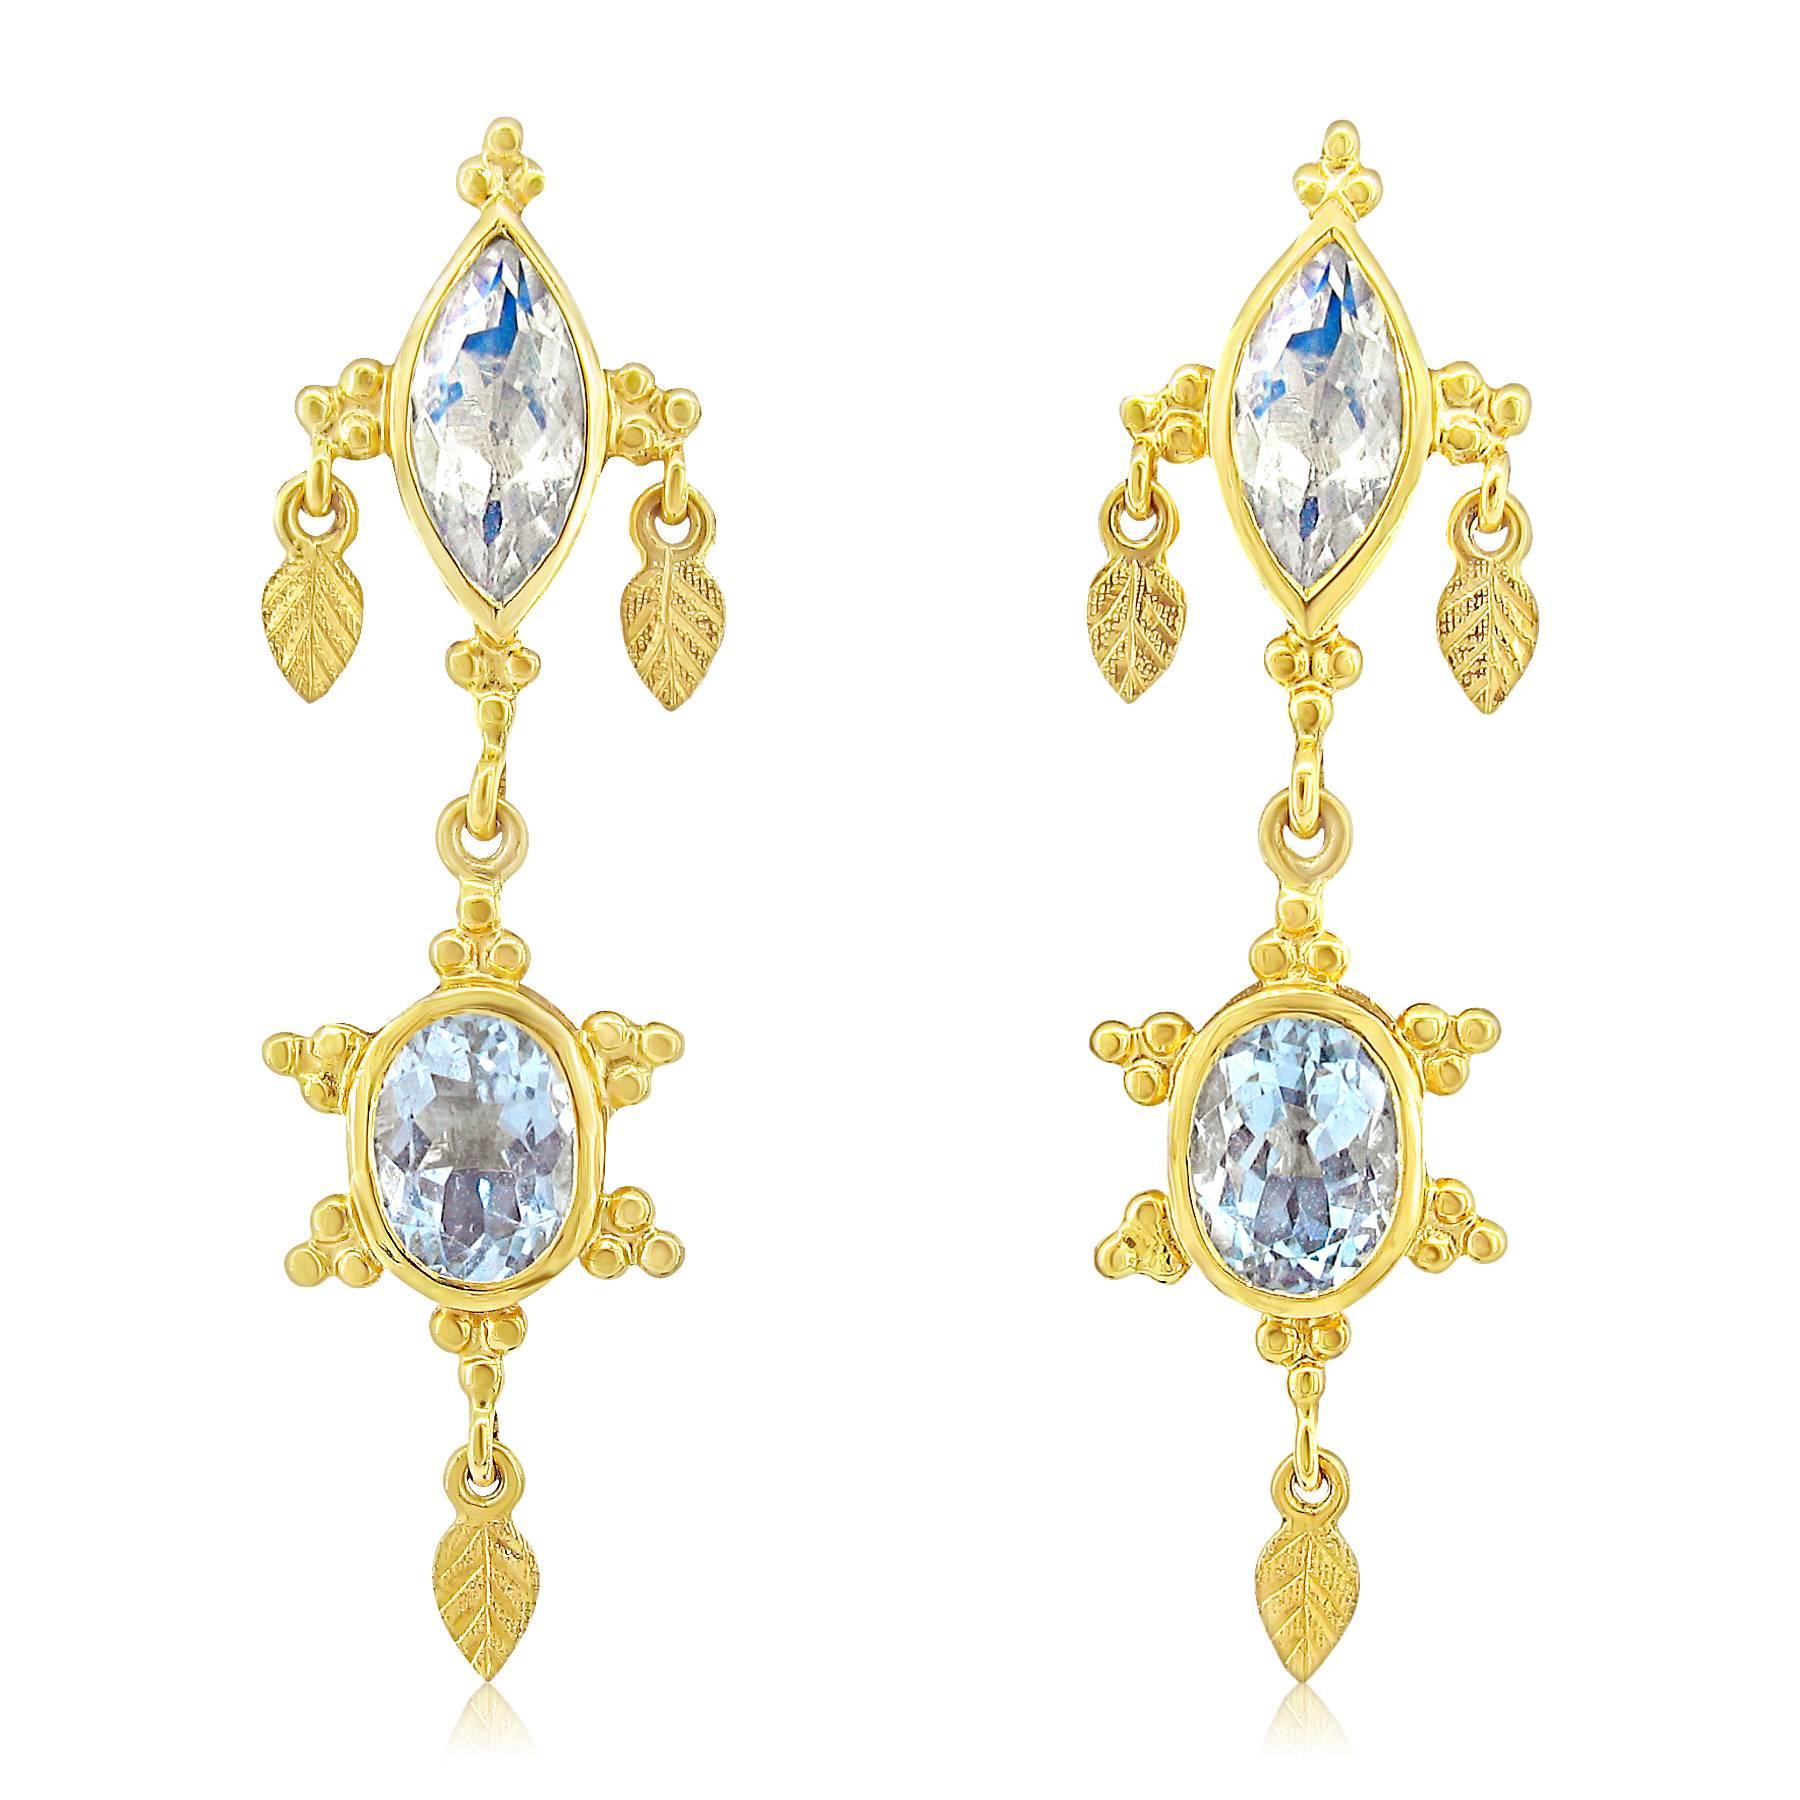 These earrings were designed and made by well known designer Paula Crevoshay. They contain two beautiful Oval Aquamarines weighing a total of 2.26 carats.  The tops feature two marquis shaped Moonstones weighing a total of 1.87 carats.  There are